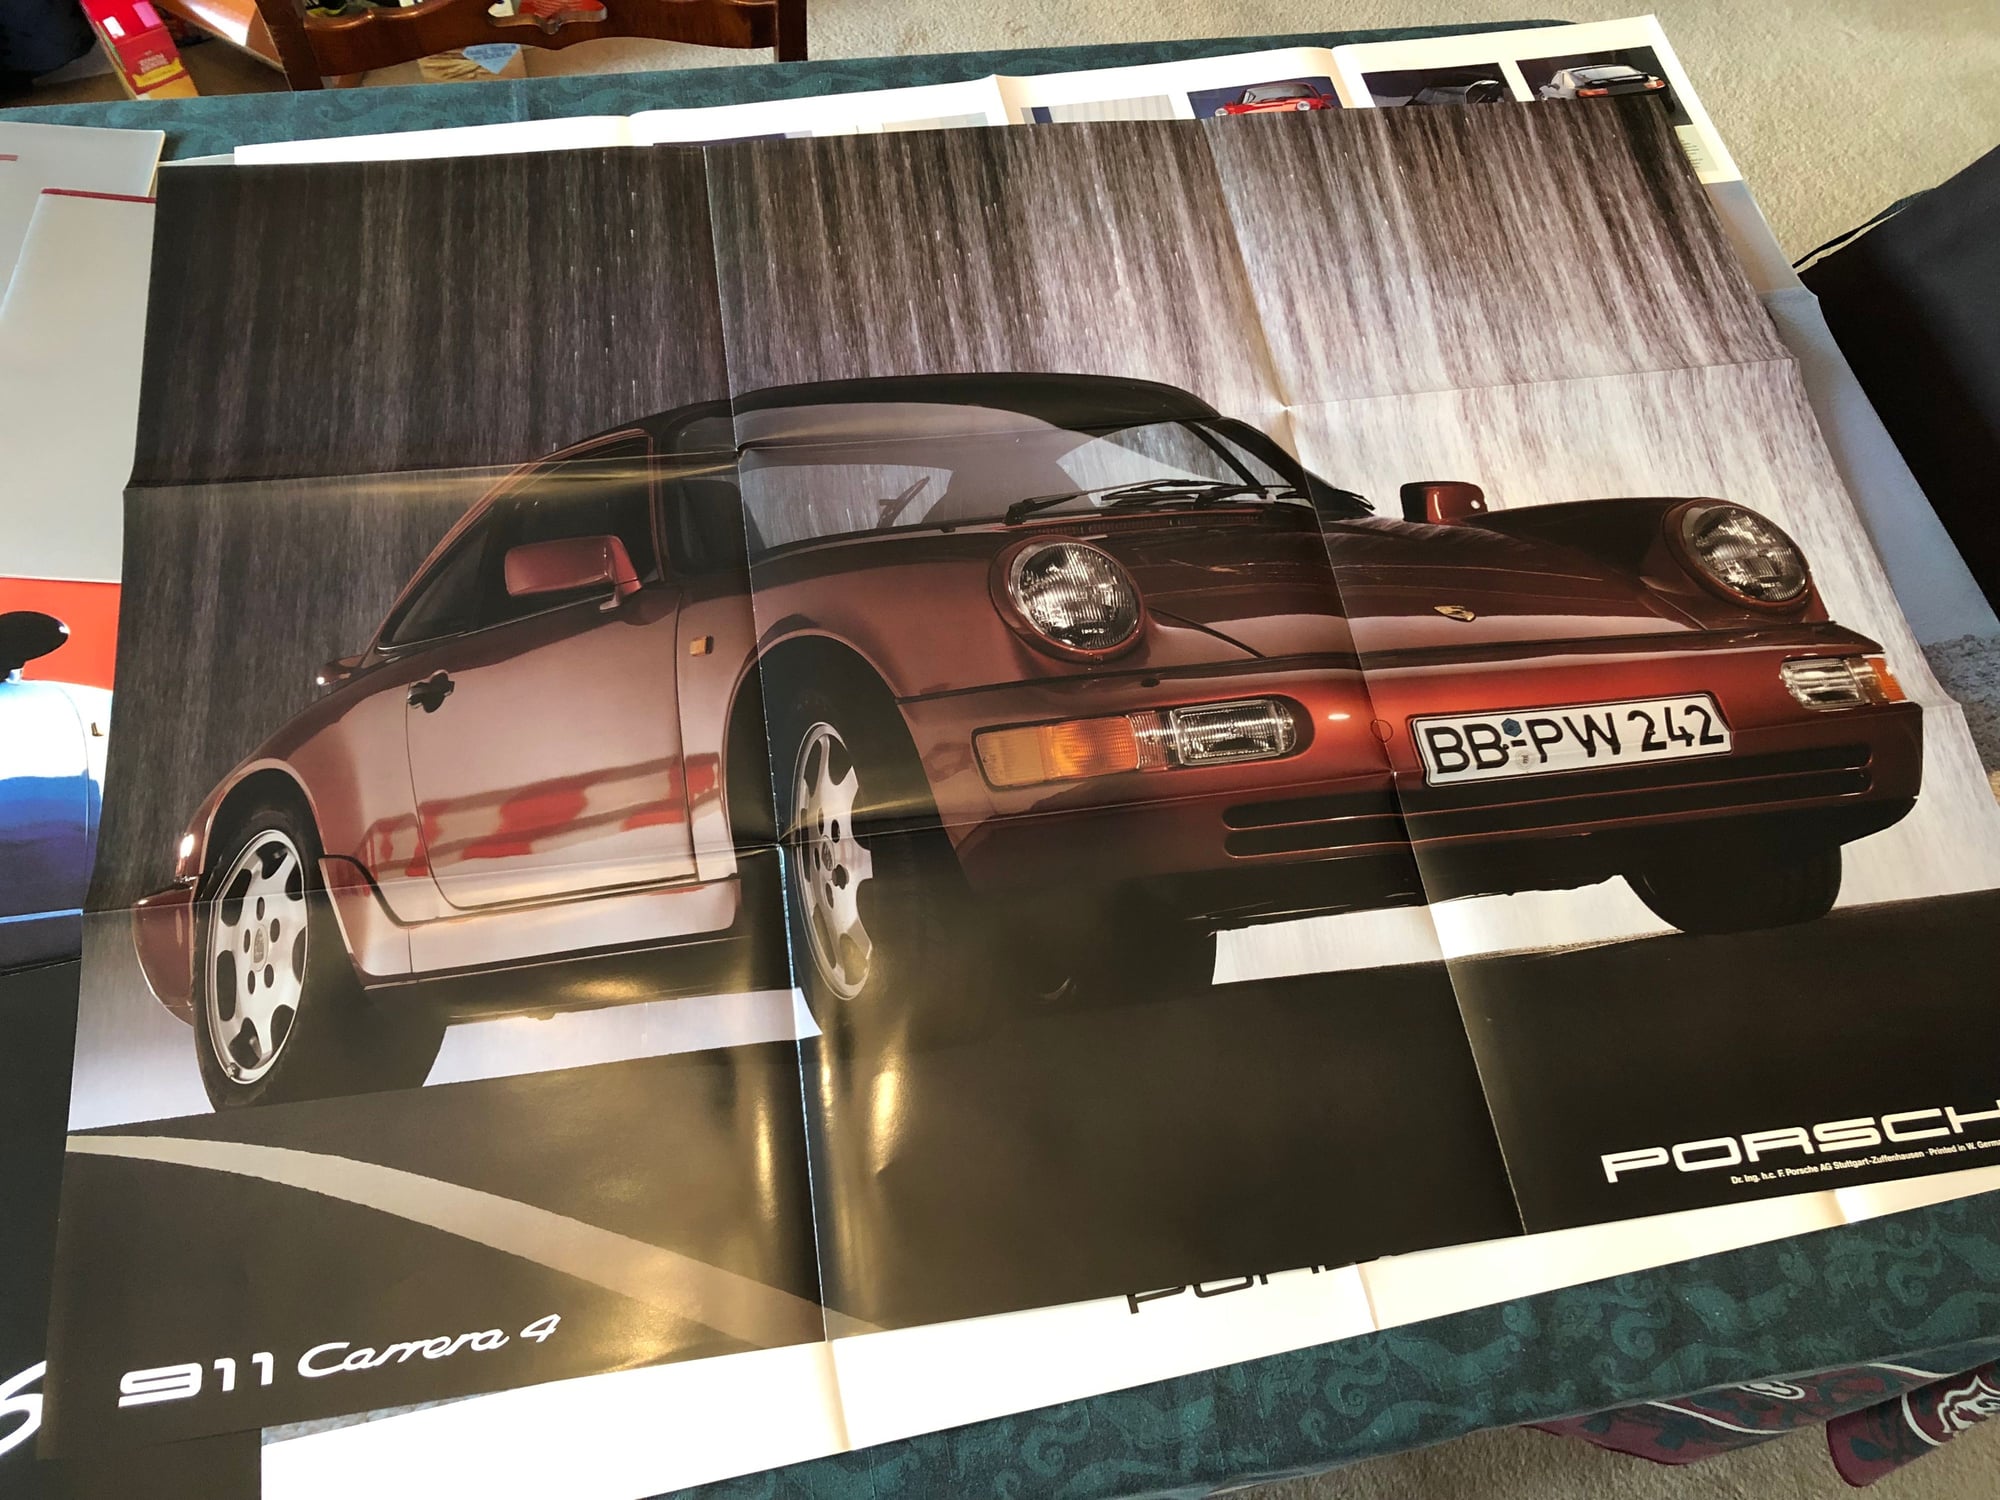 Miscellaneous - 1989/1990 964 Factory Posters - Used - 1989 to 1994 Porsche 911 - London, ON N6K4J5, Canada